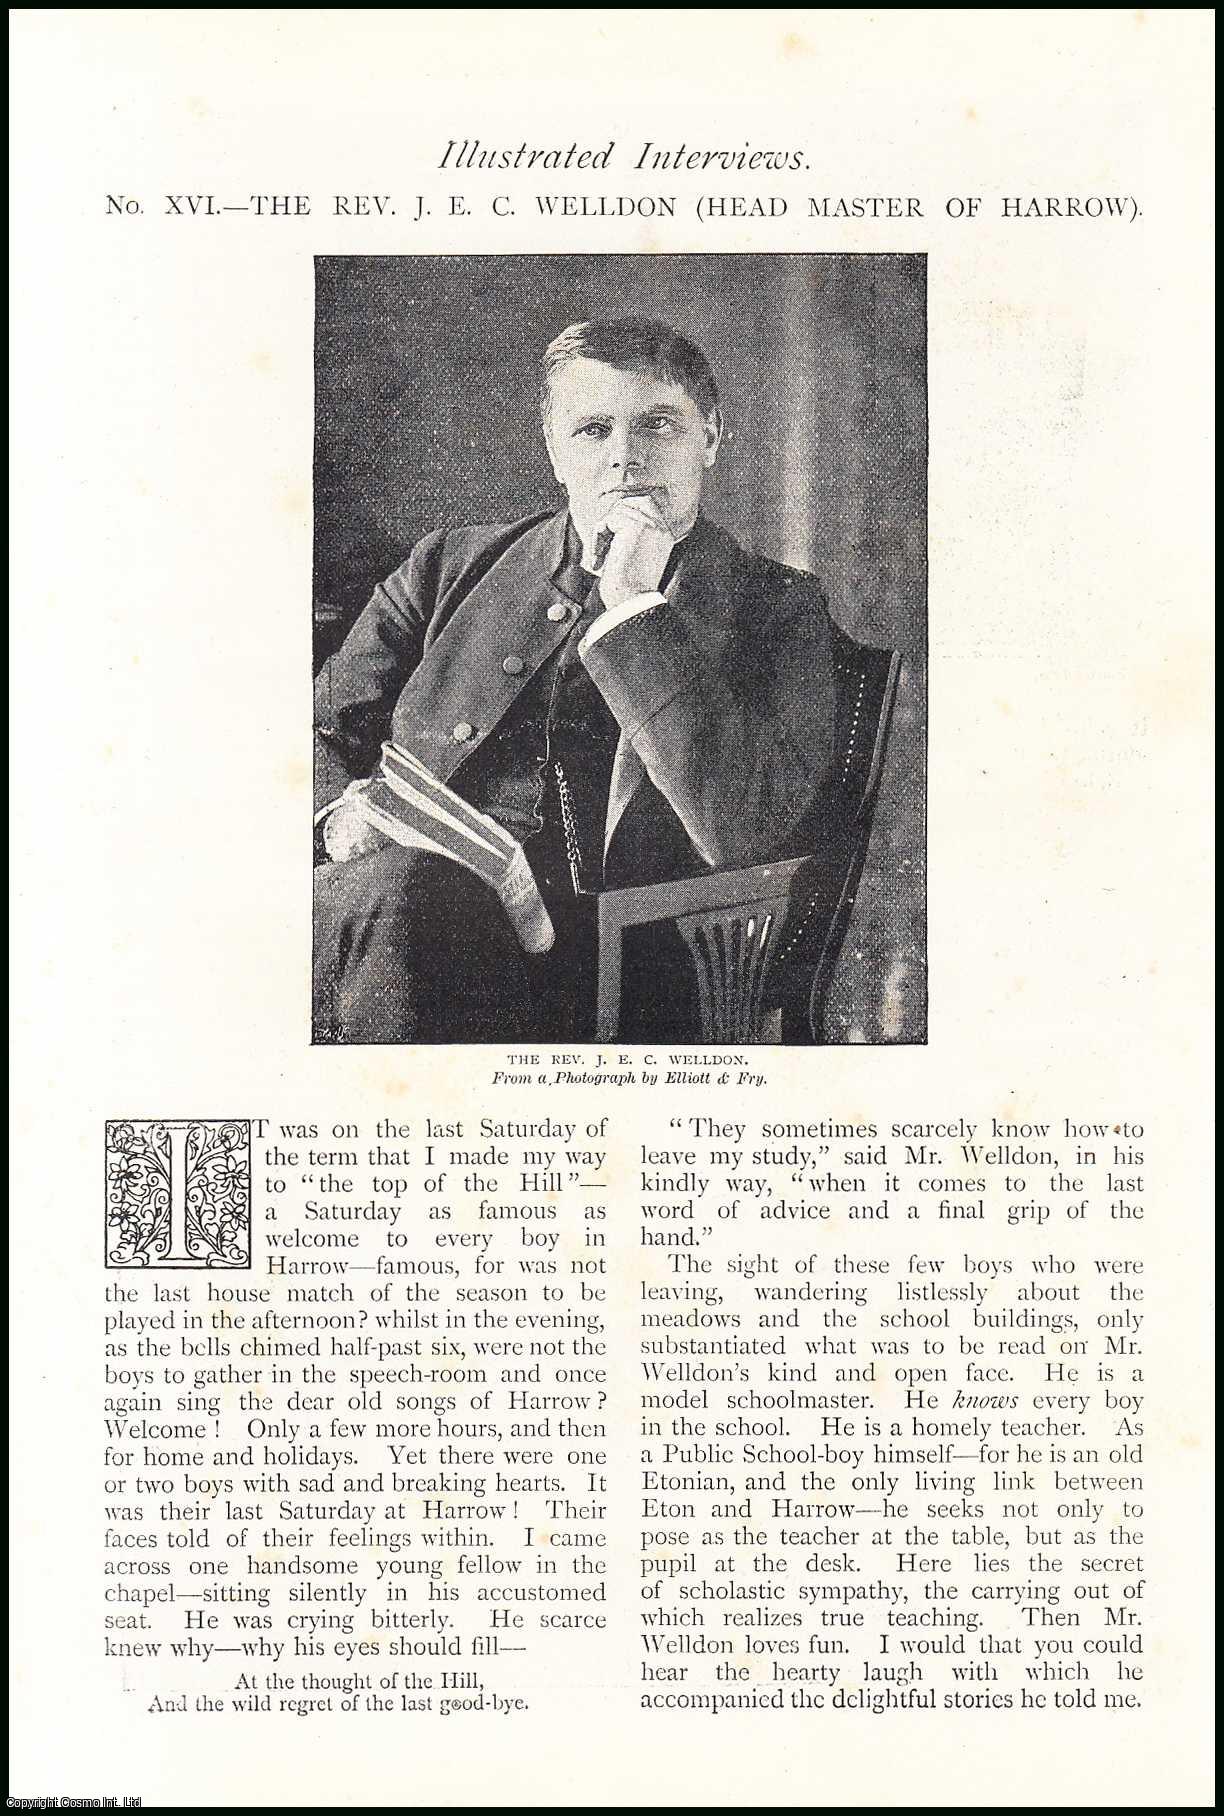 Harry How - The Rev. J. E. C. Welldon, Head Master of Harrow. Illustrated Interviews. An original article from The Strand Magazine, 1892.